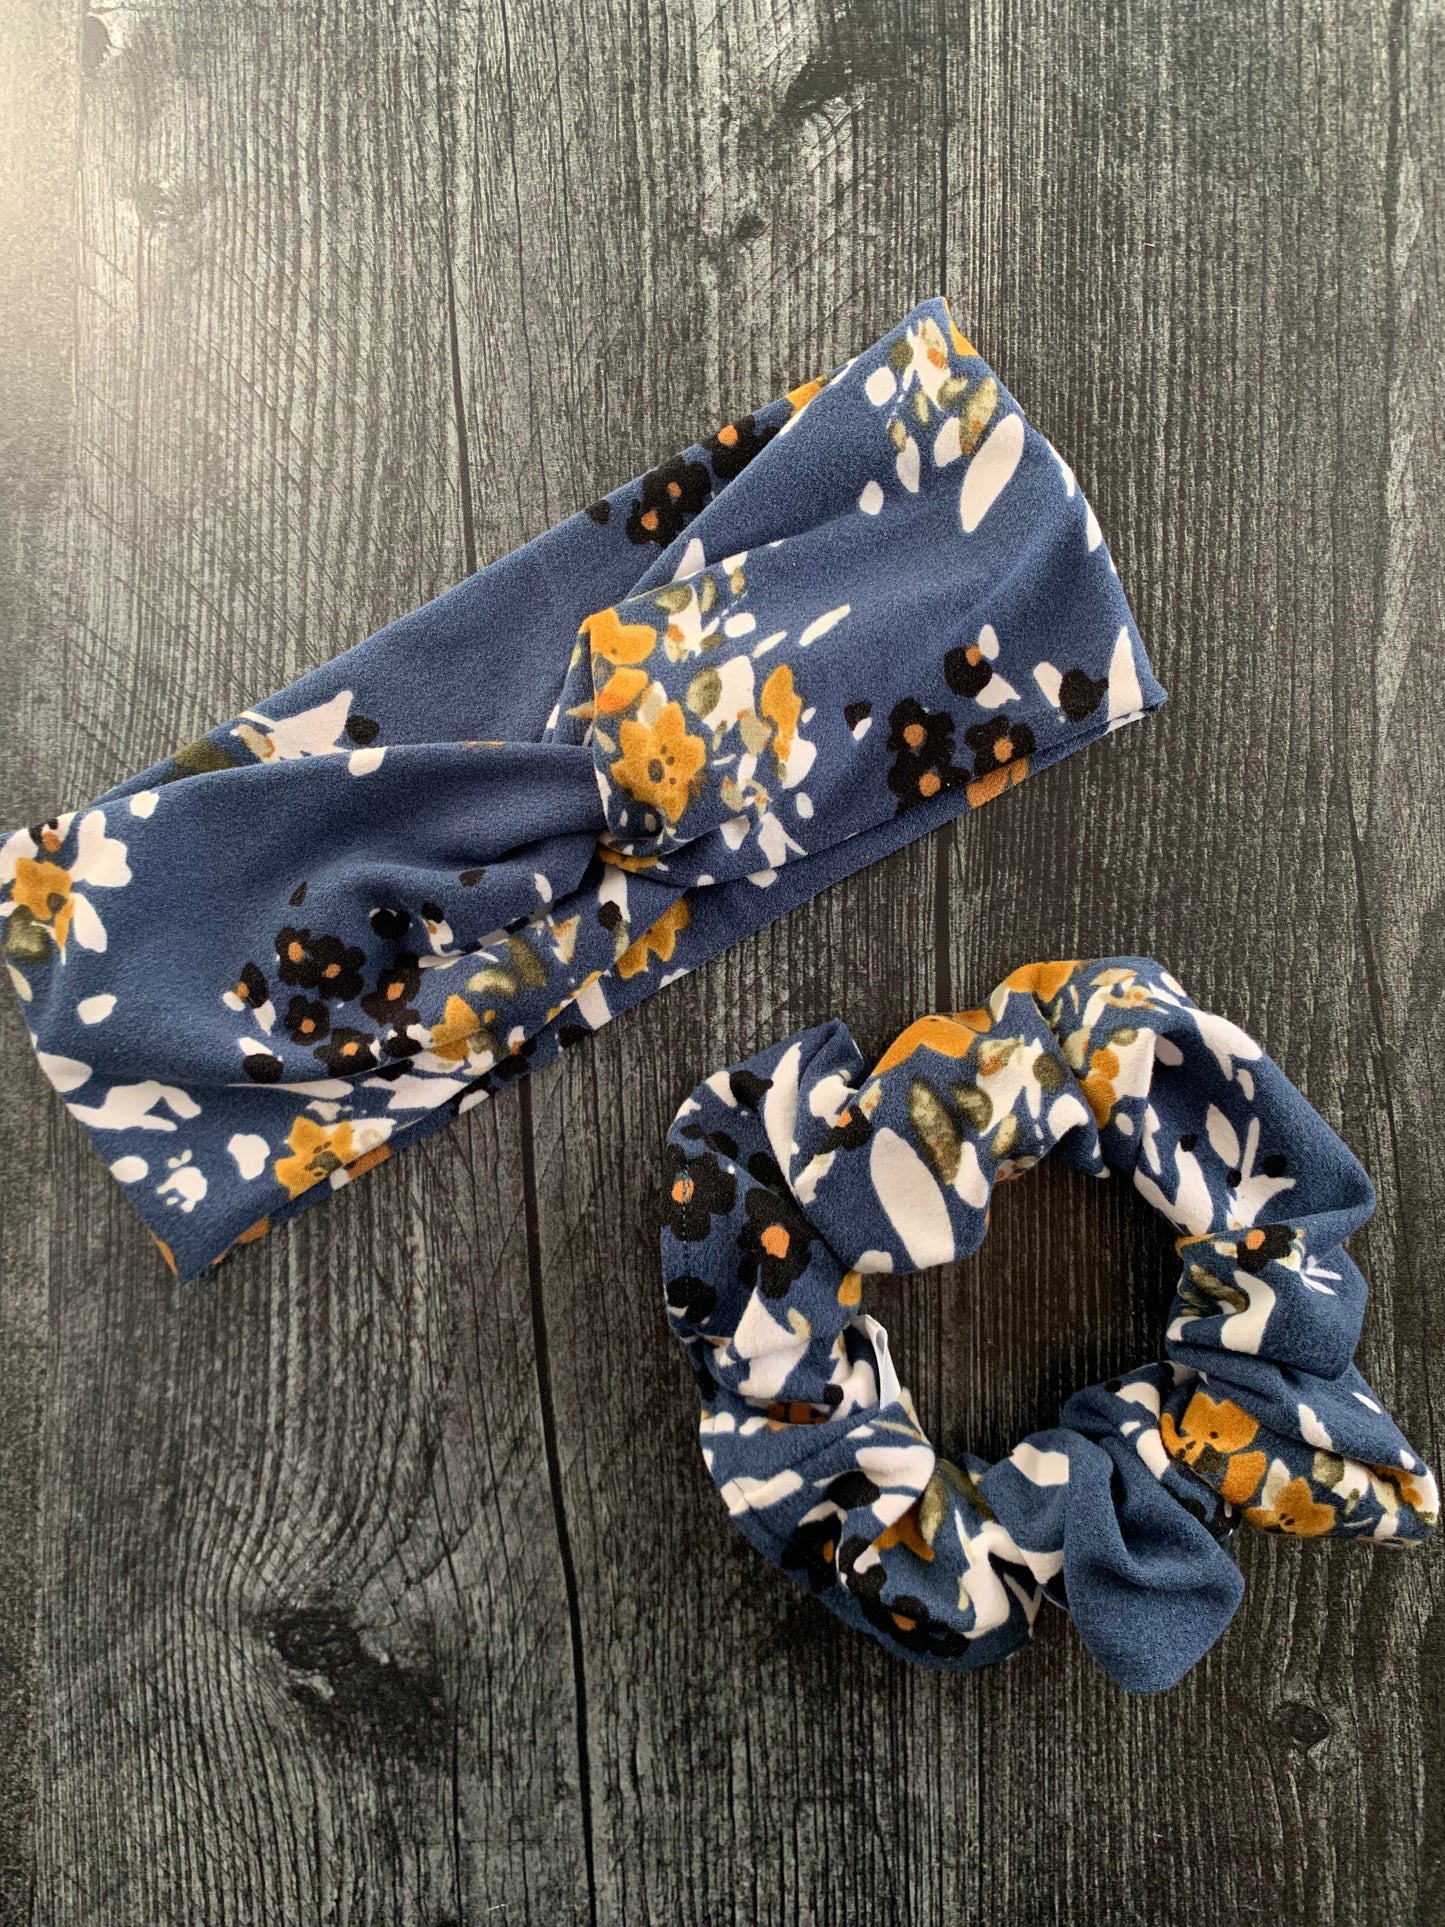 Floral on Blue - Twisted Knit Headbands